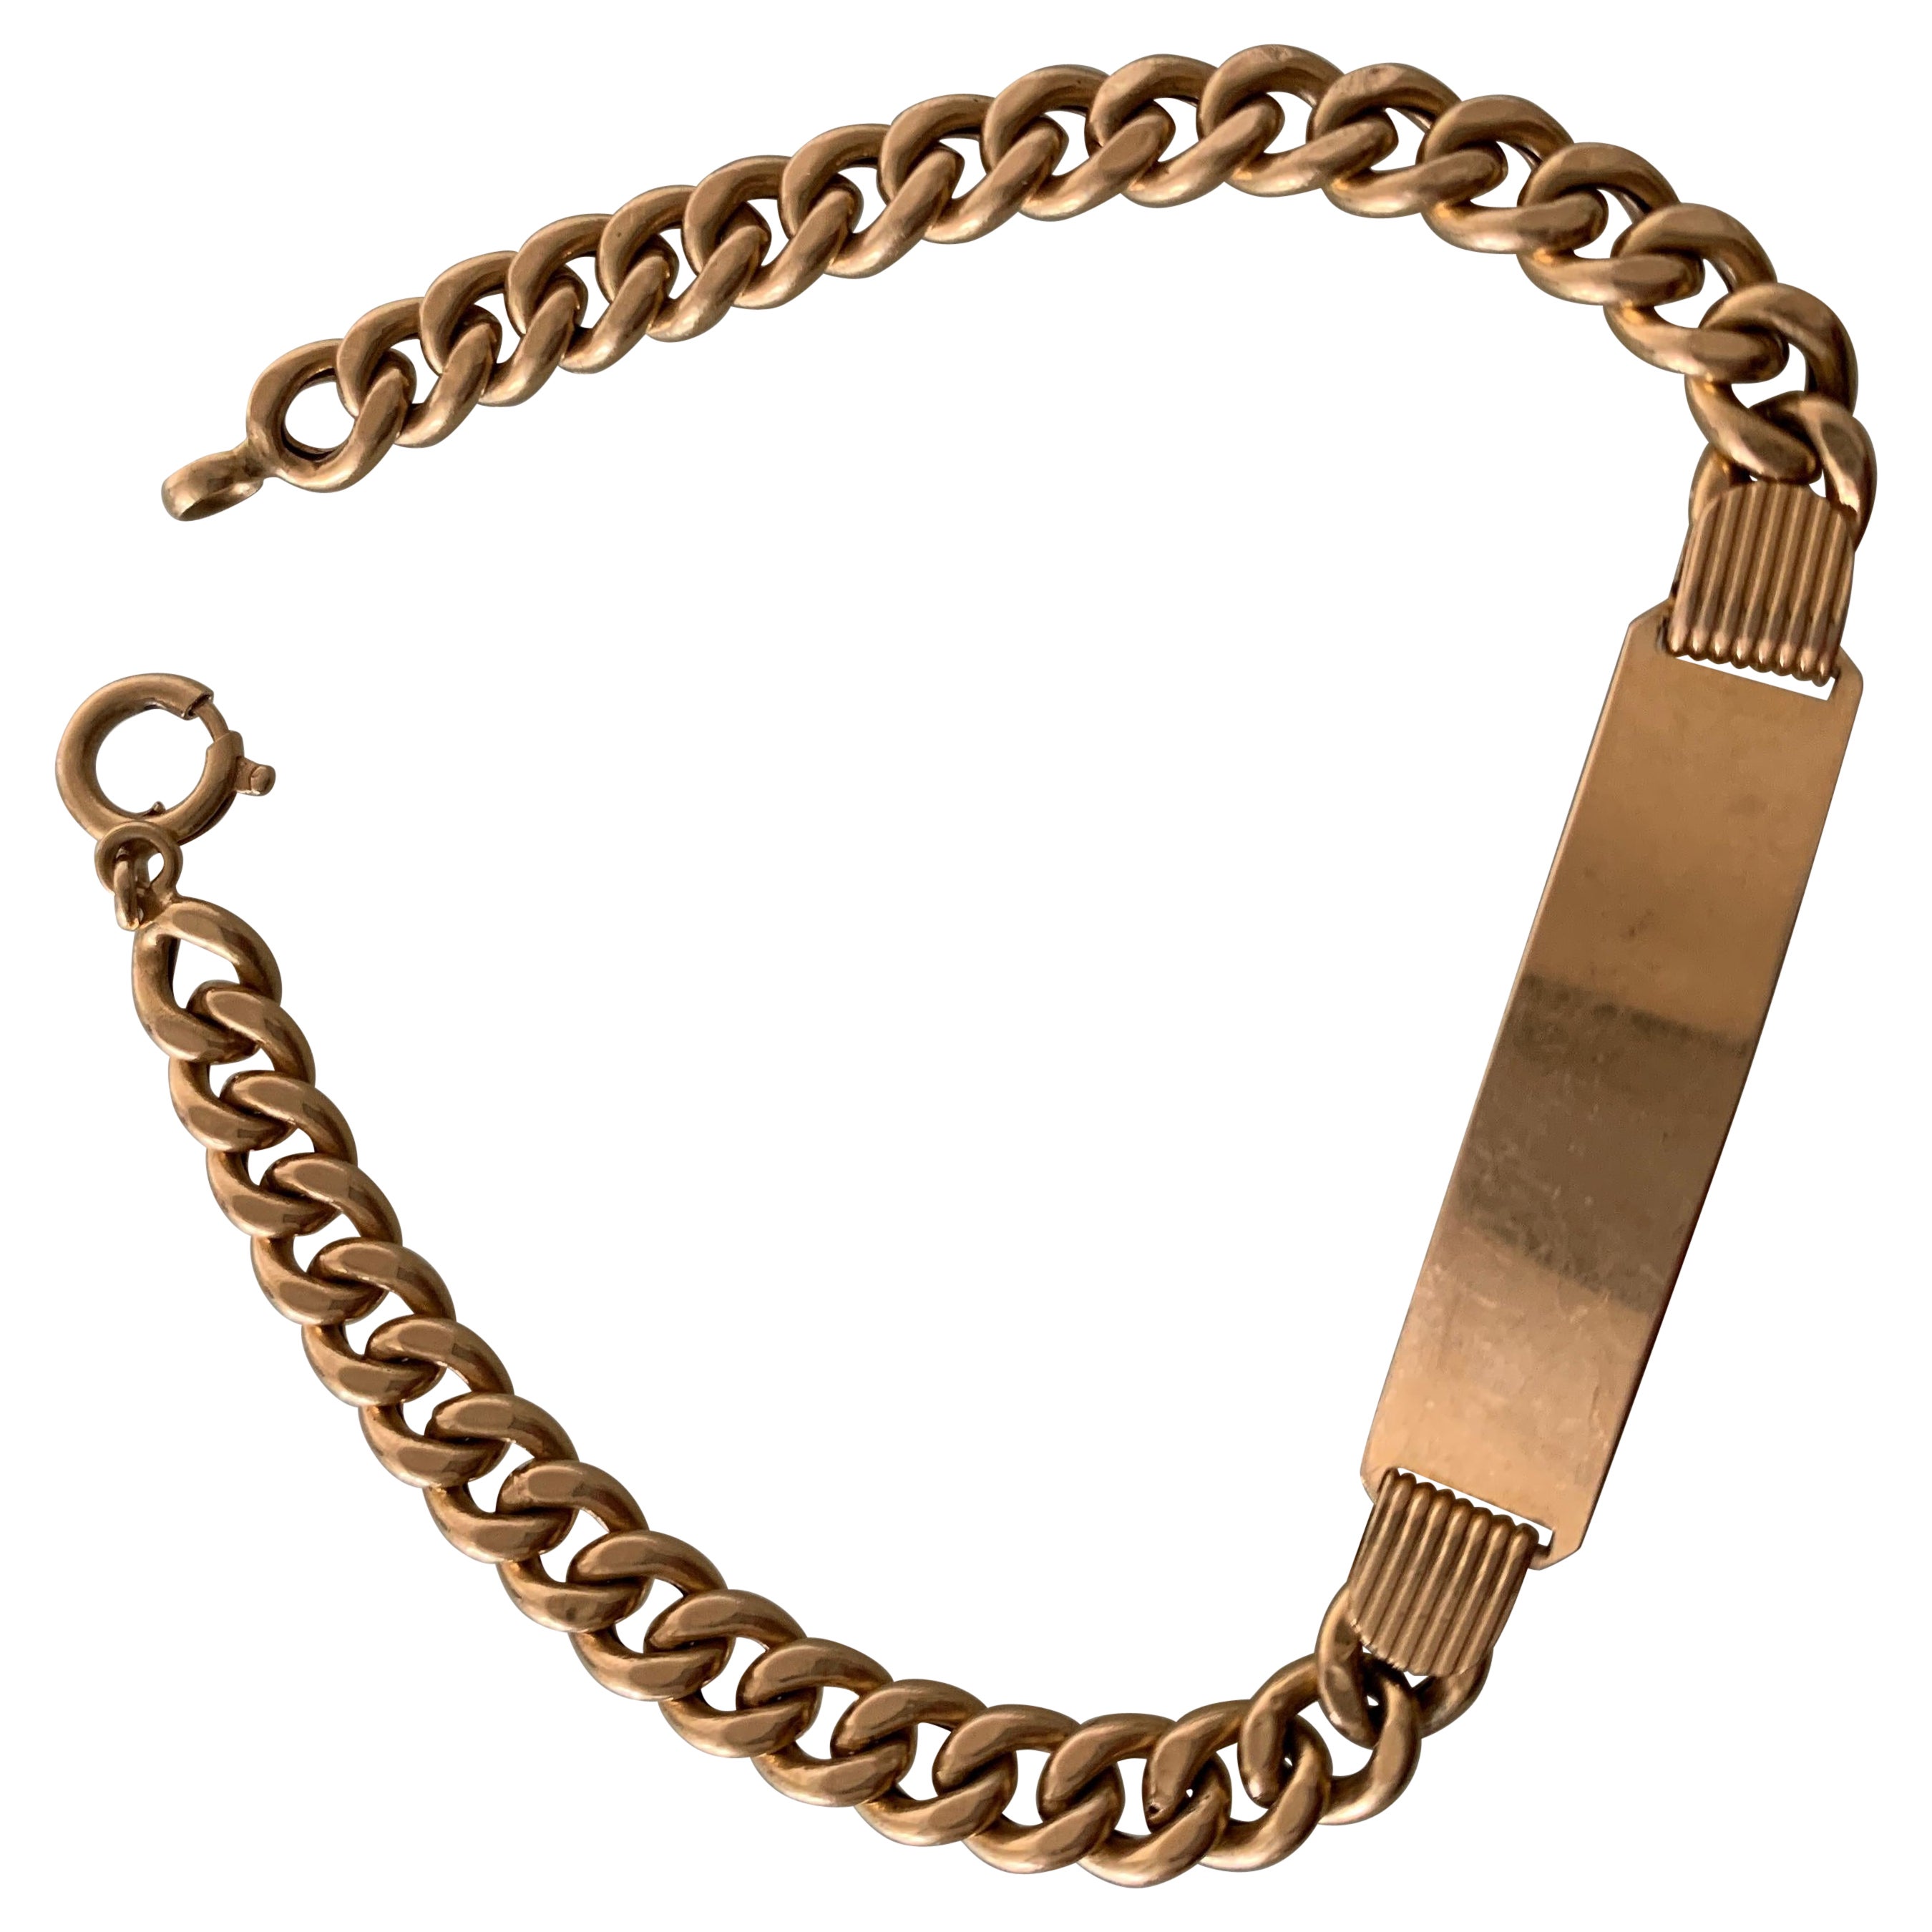 Fusion Polished Curb Link Bracelet (21cm) in 18ct Yellow Gold - Brilliant  Cut, Pave Set | Pragnell